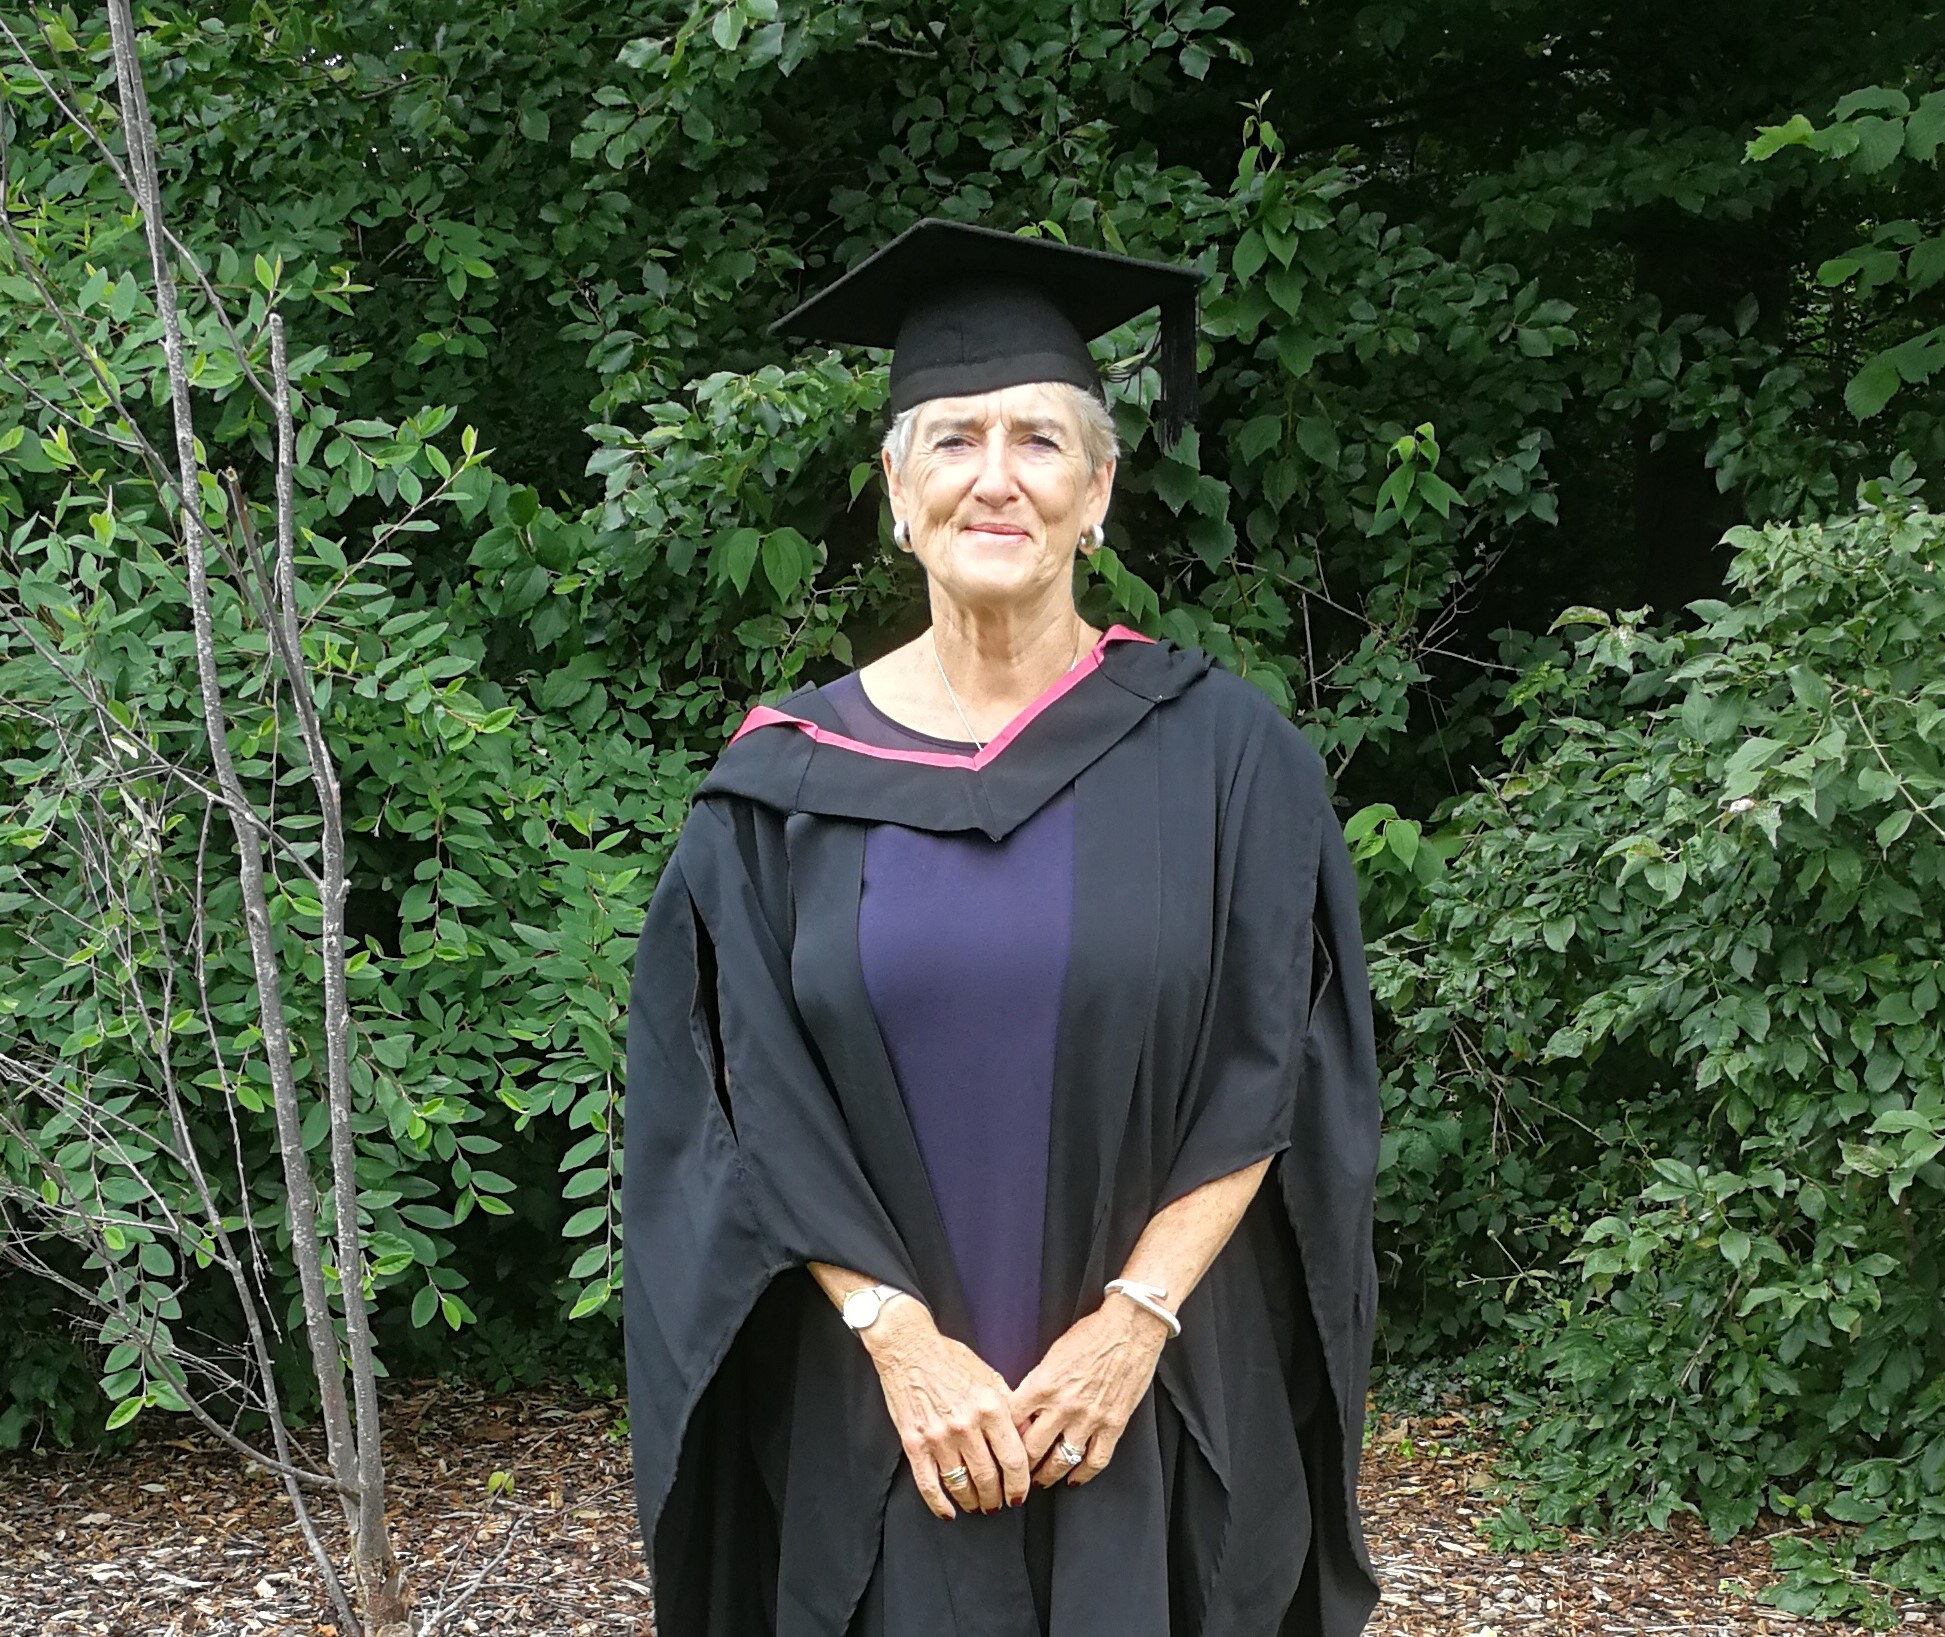 Fiona on graduation day, wearing a black motarboard hat and gown, holding her degree certificate